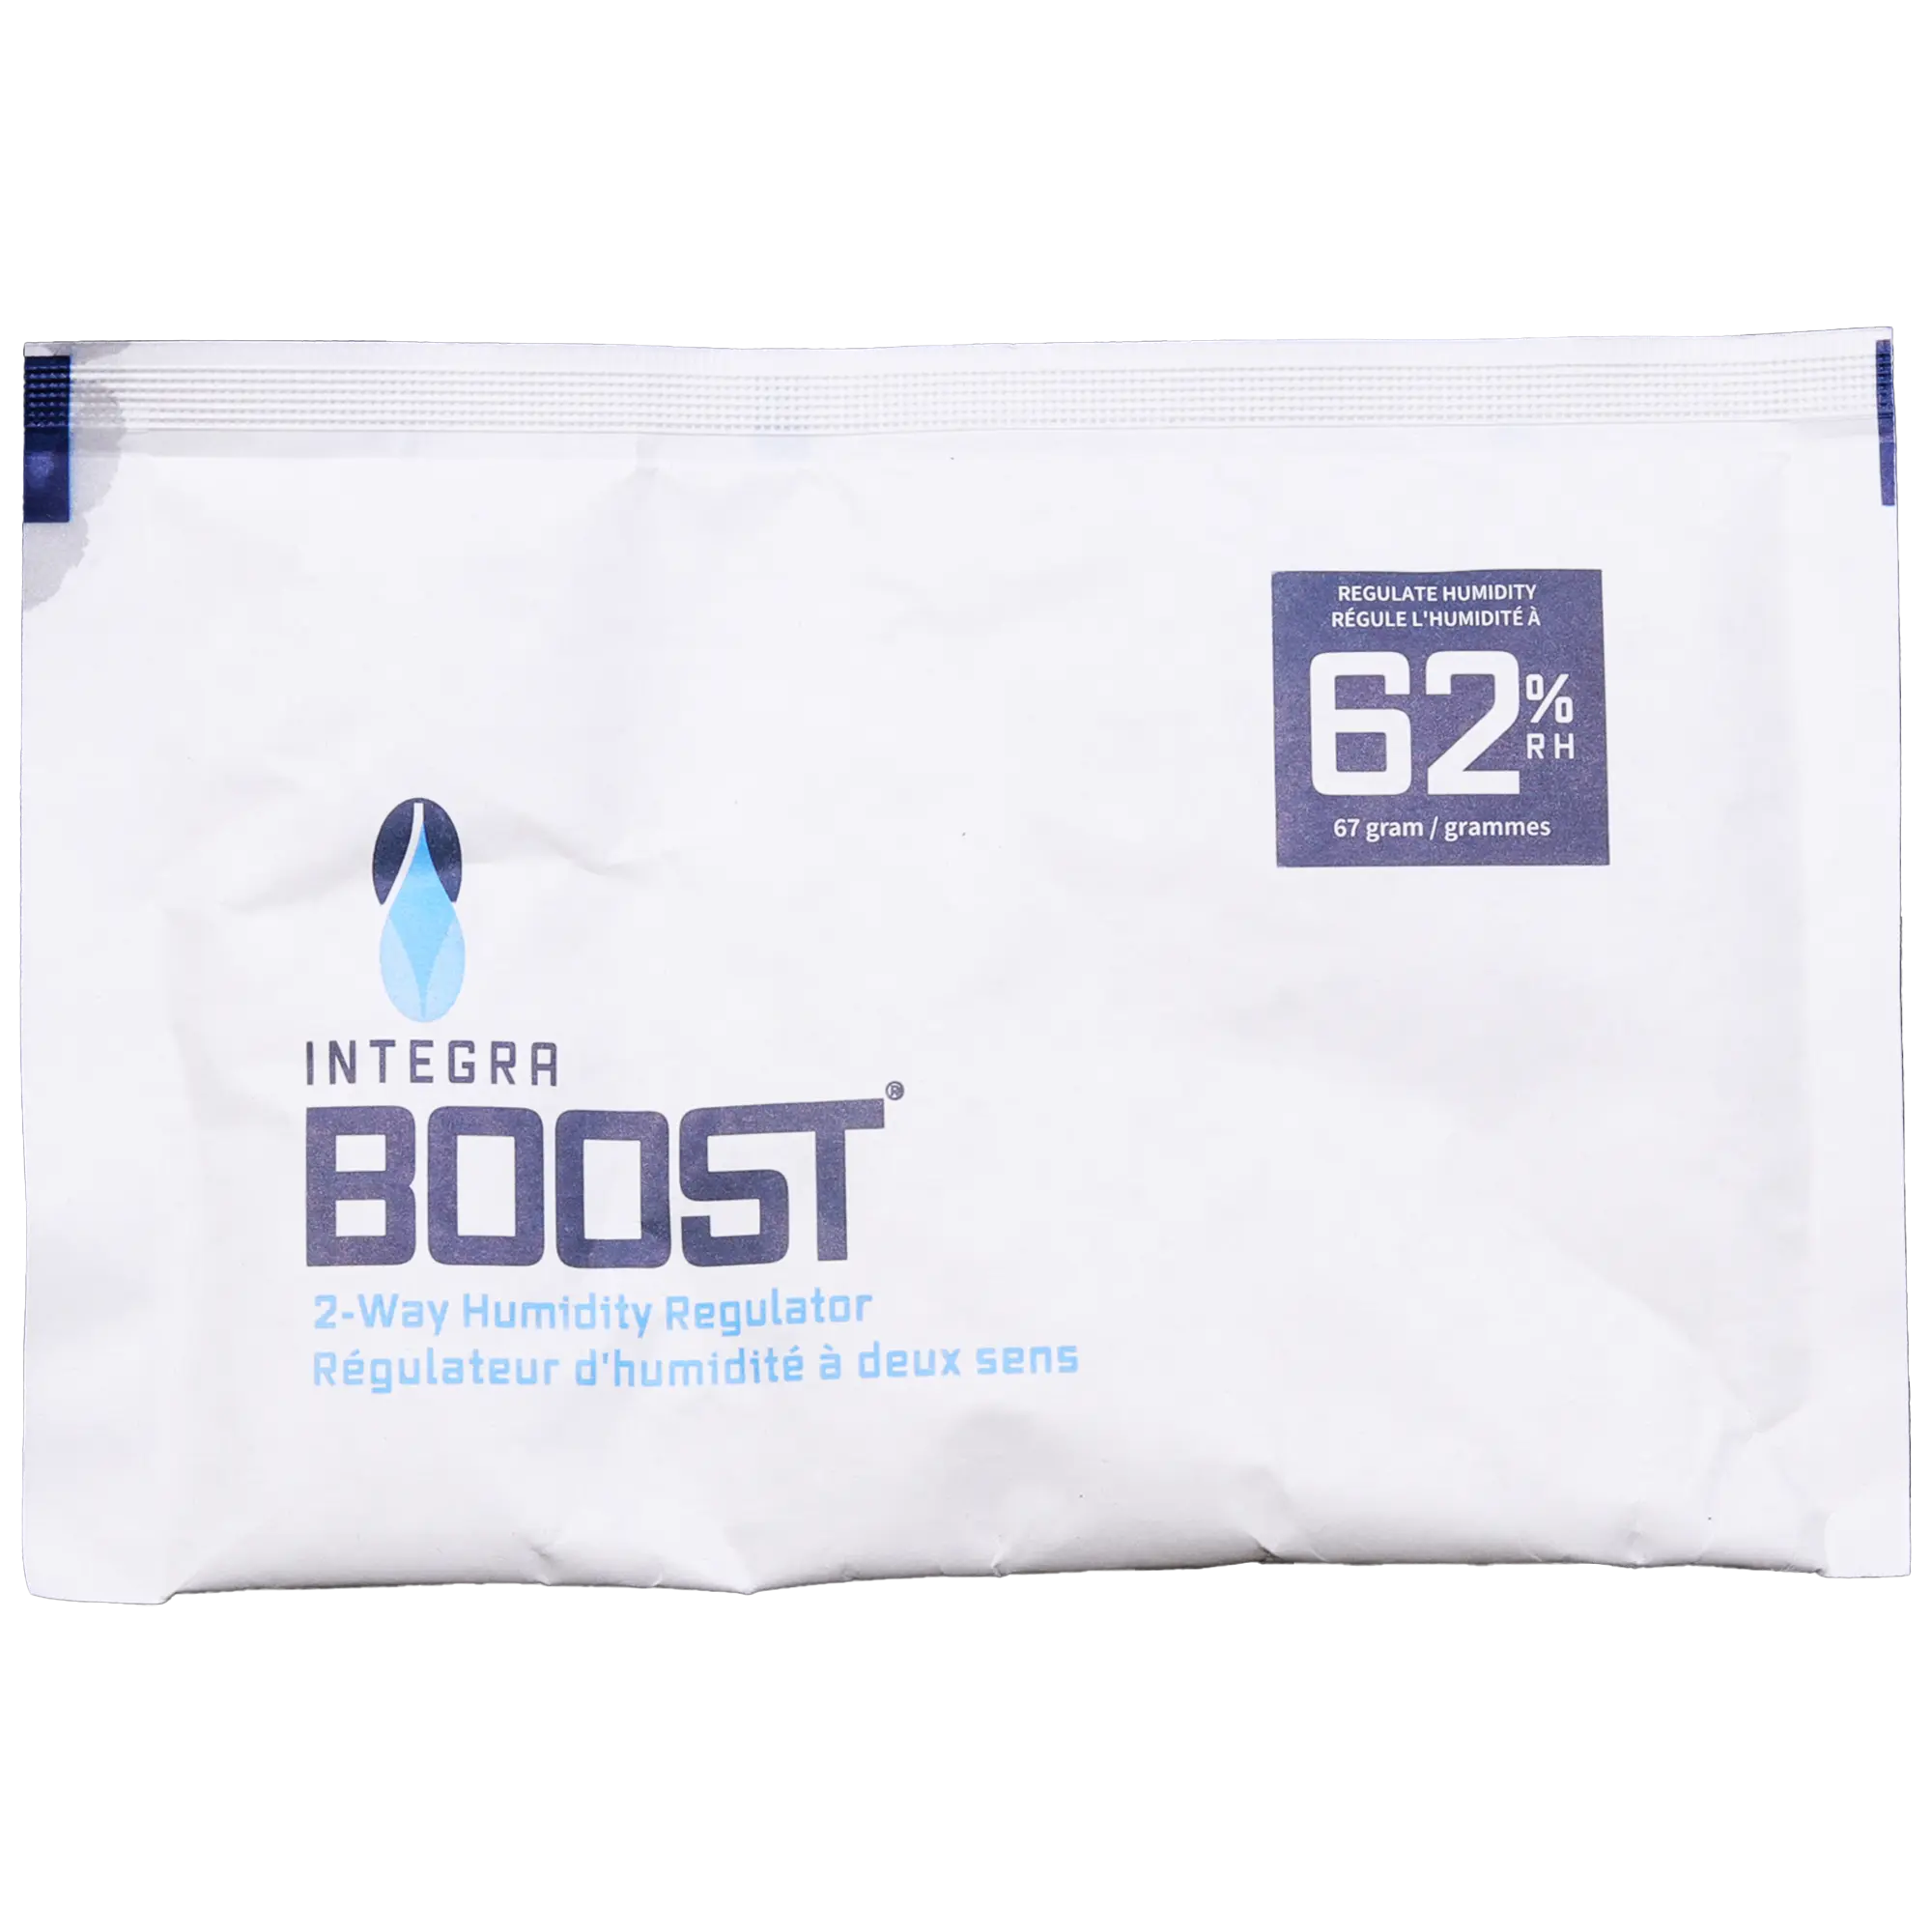 Integra Boost 67g Befeuchterpack 62% R.H.

